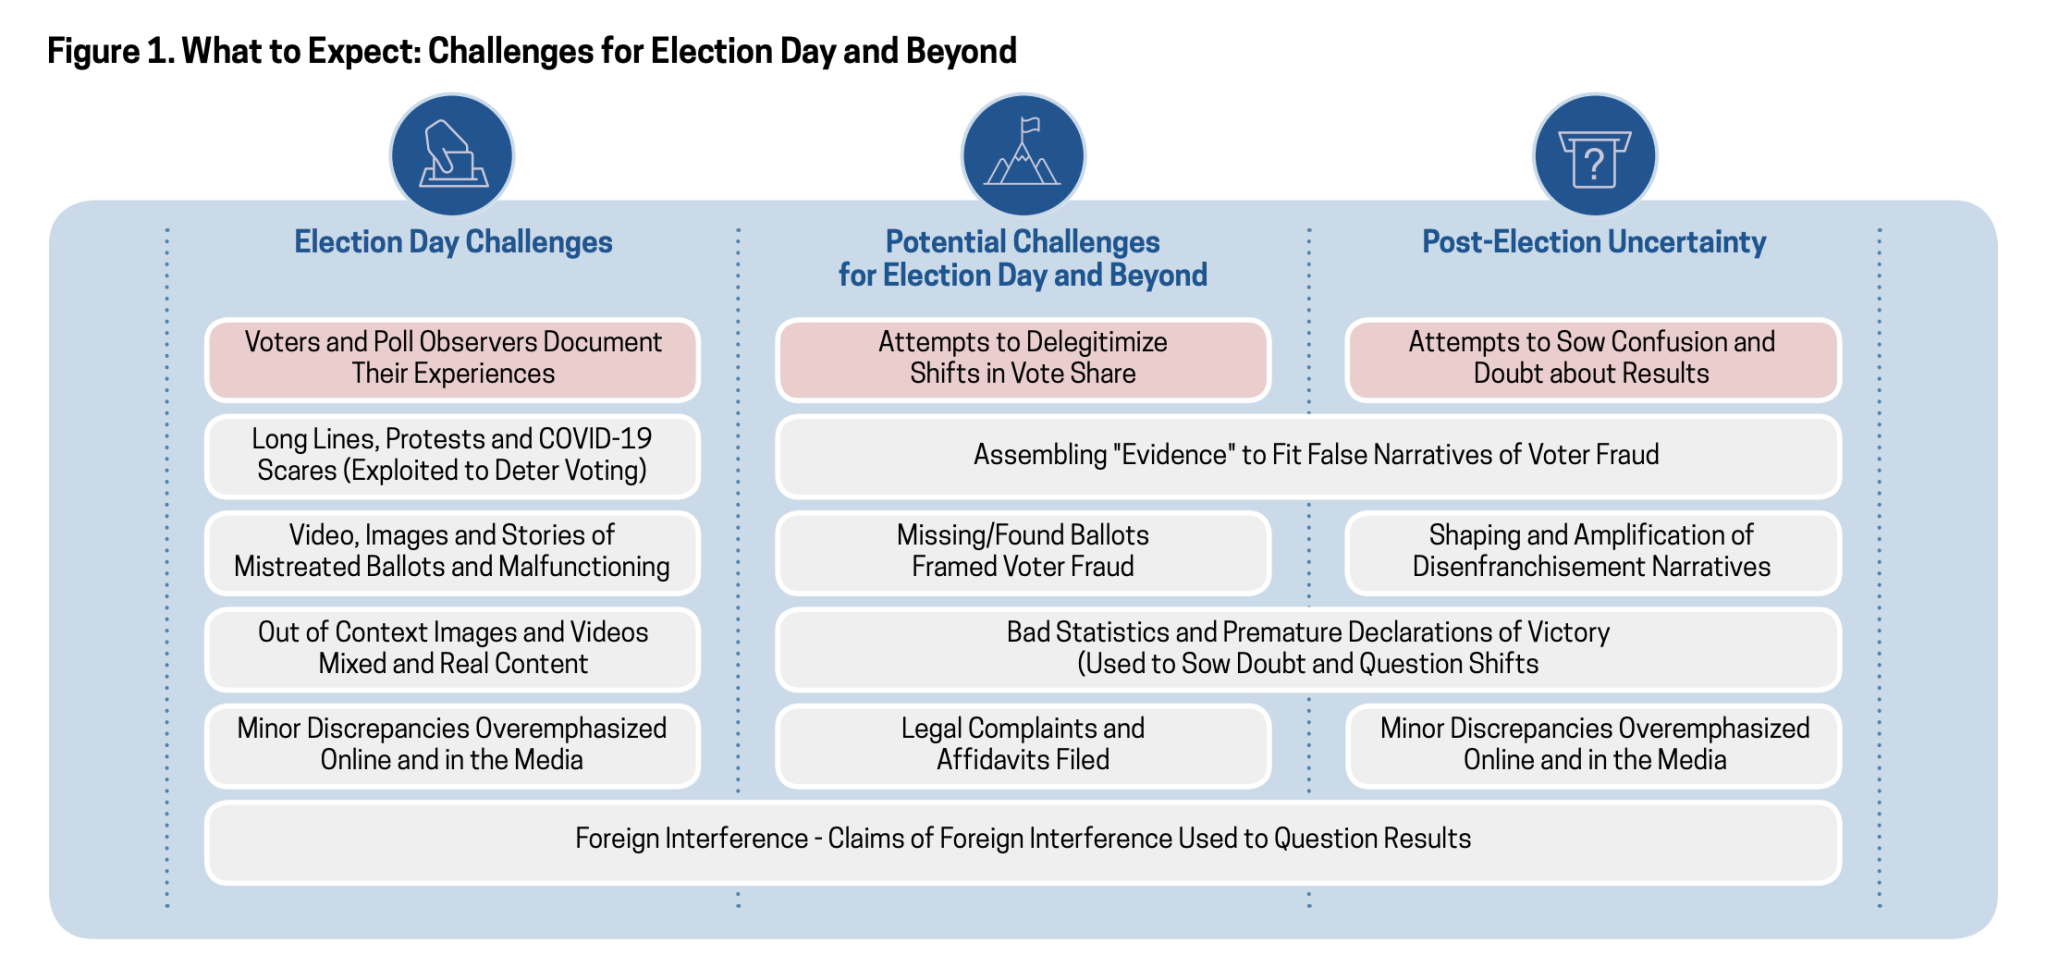 Figure 1. What to Expect: Challenges for Election Day and Beyond.